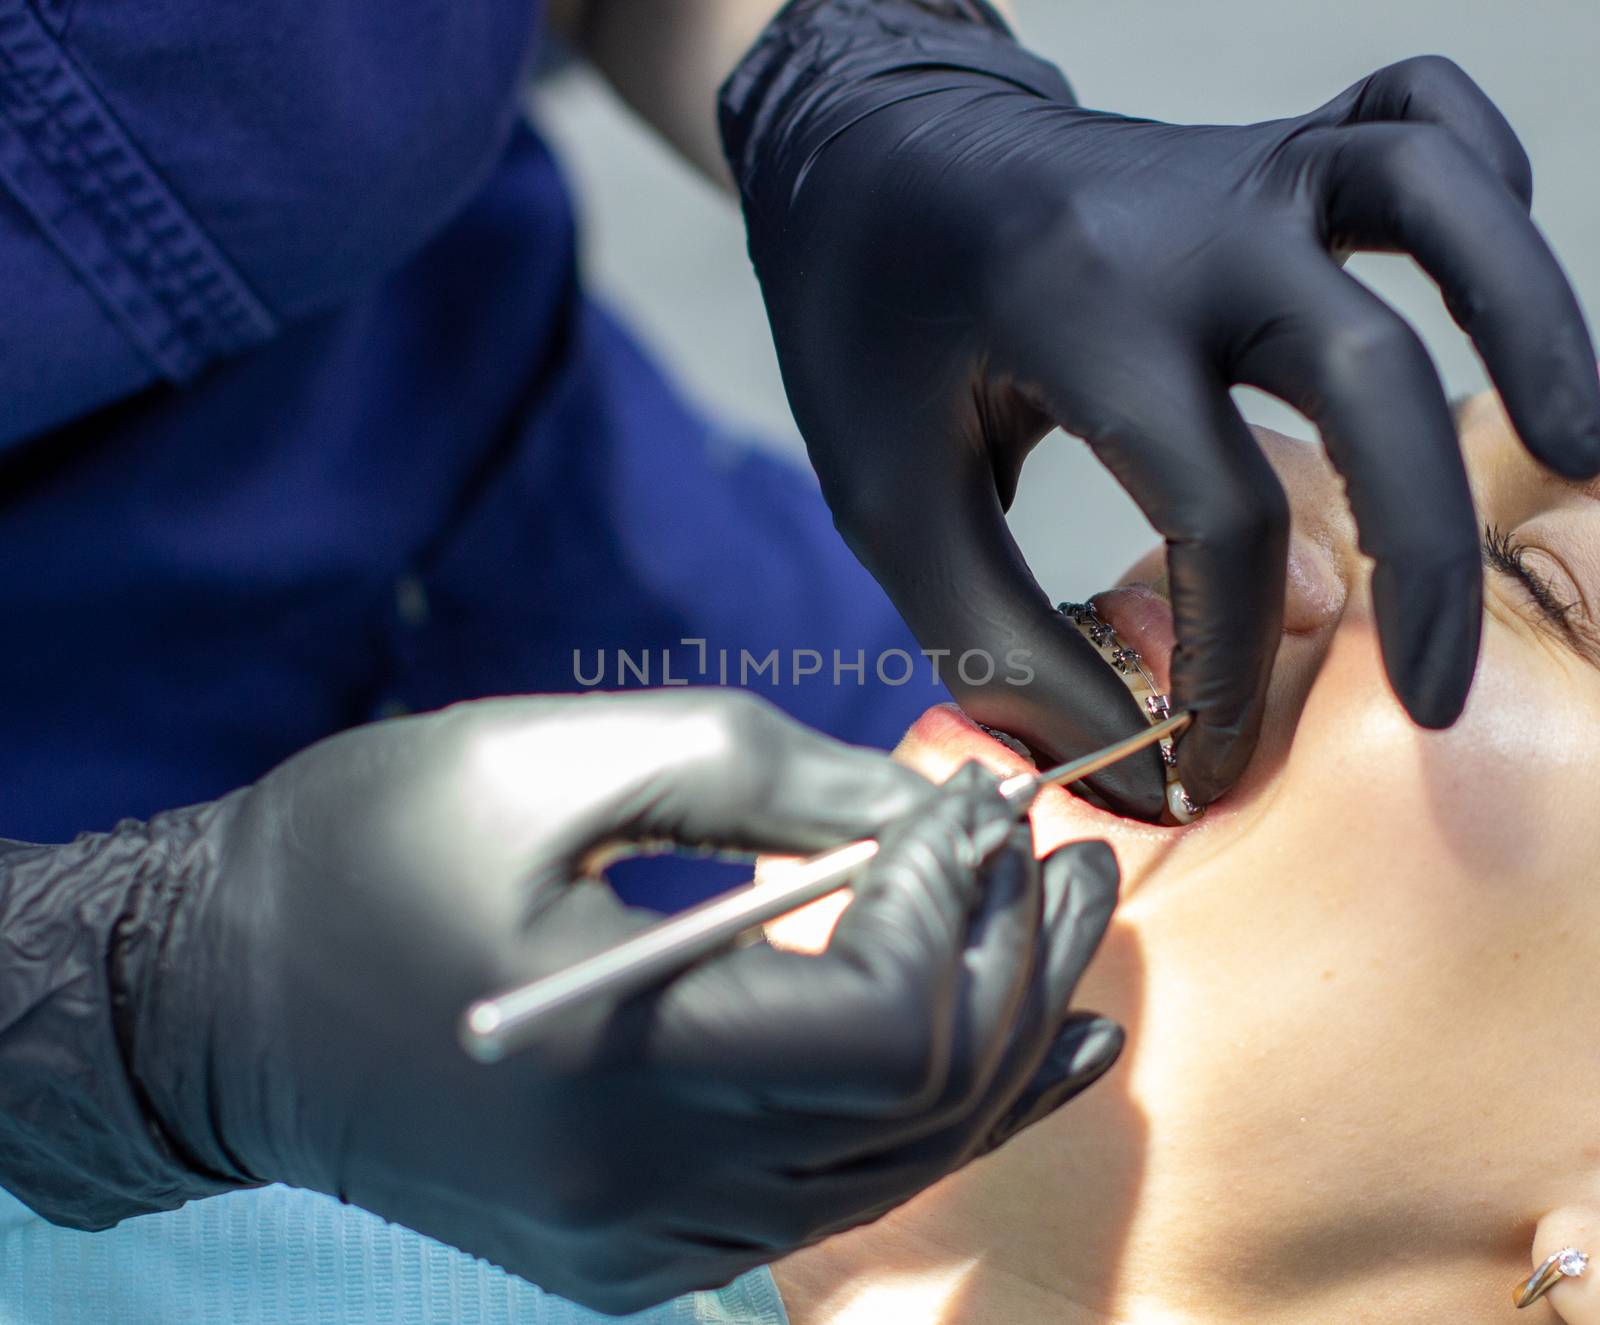 woman with braces visits an orthodontist, in a dental chair.during the procedure of installing the arch of braces on the upper and lower teeth.The dentist is wearing gloves and has tools in his hands.